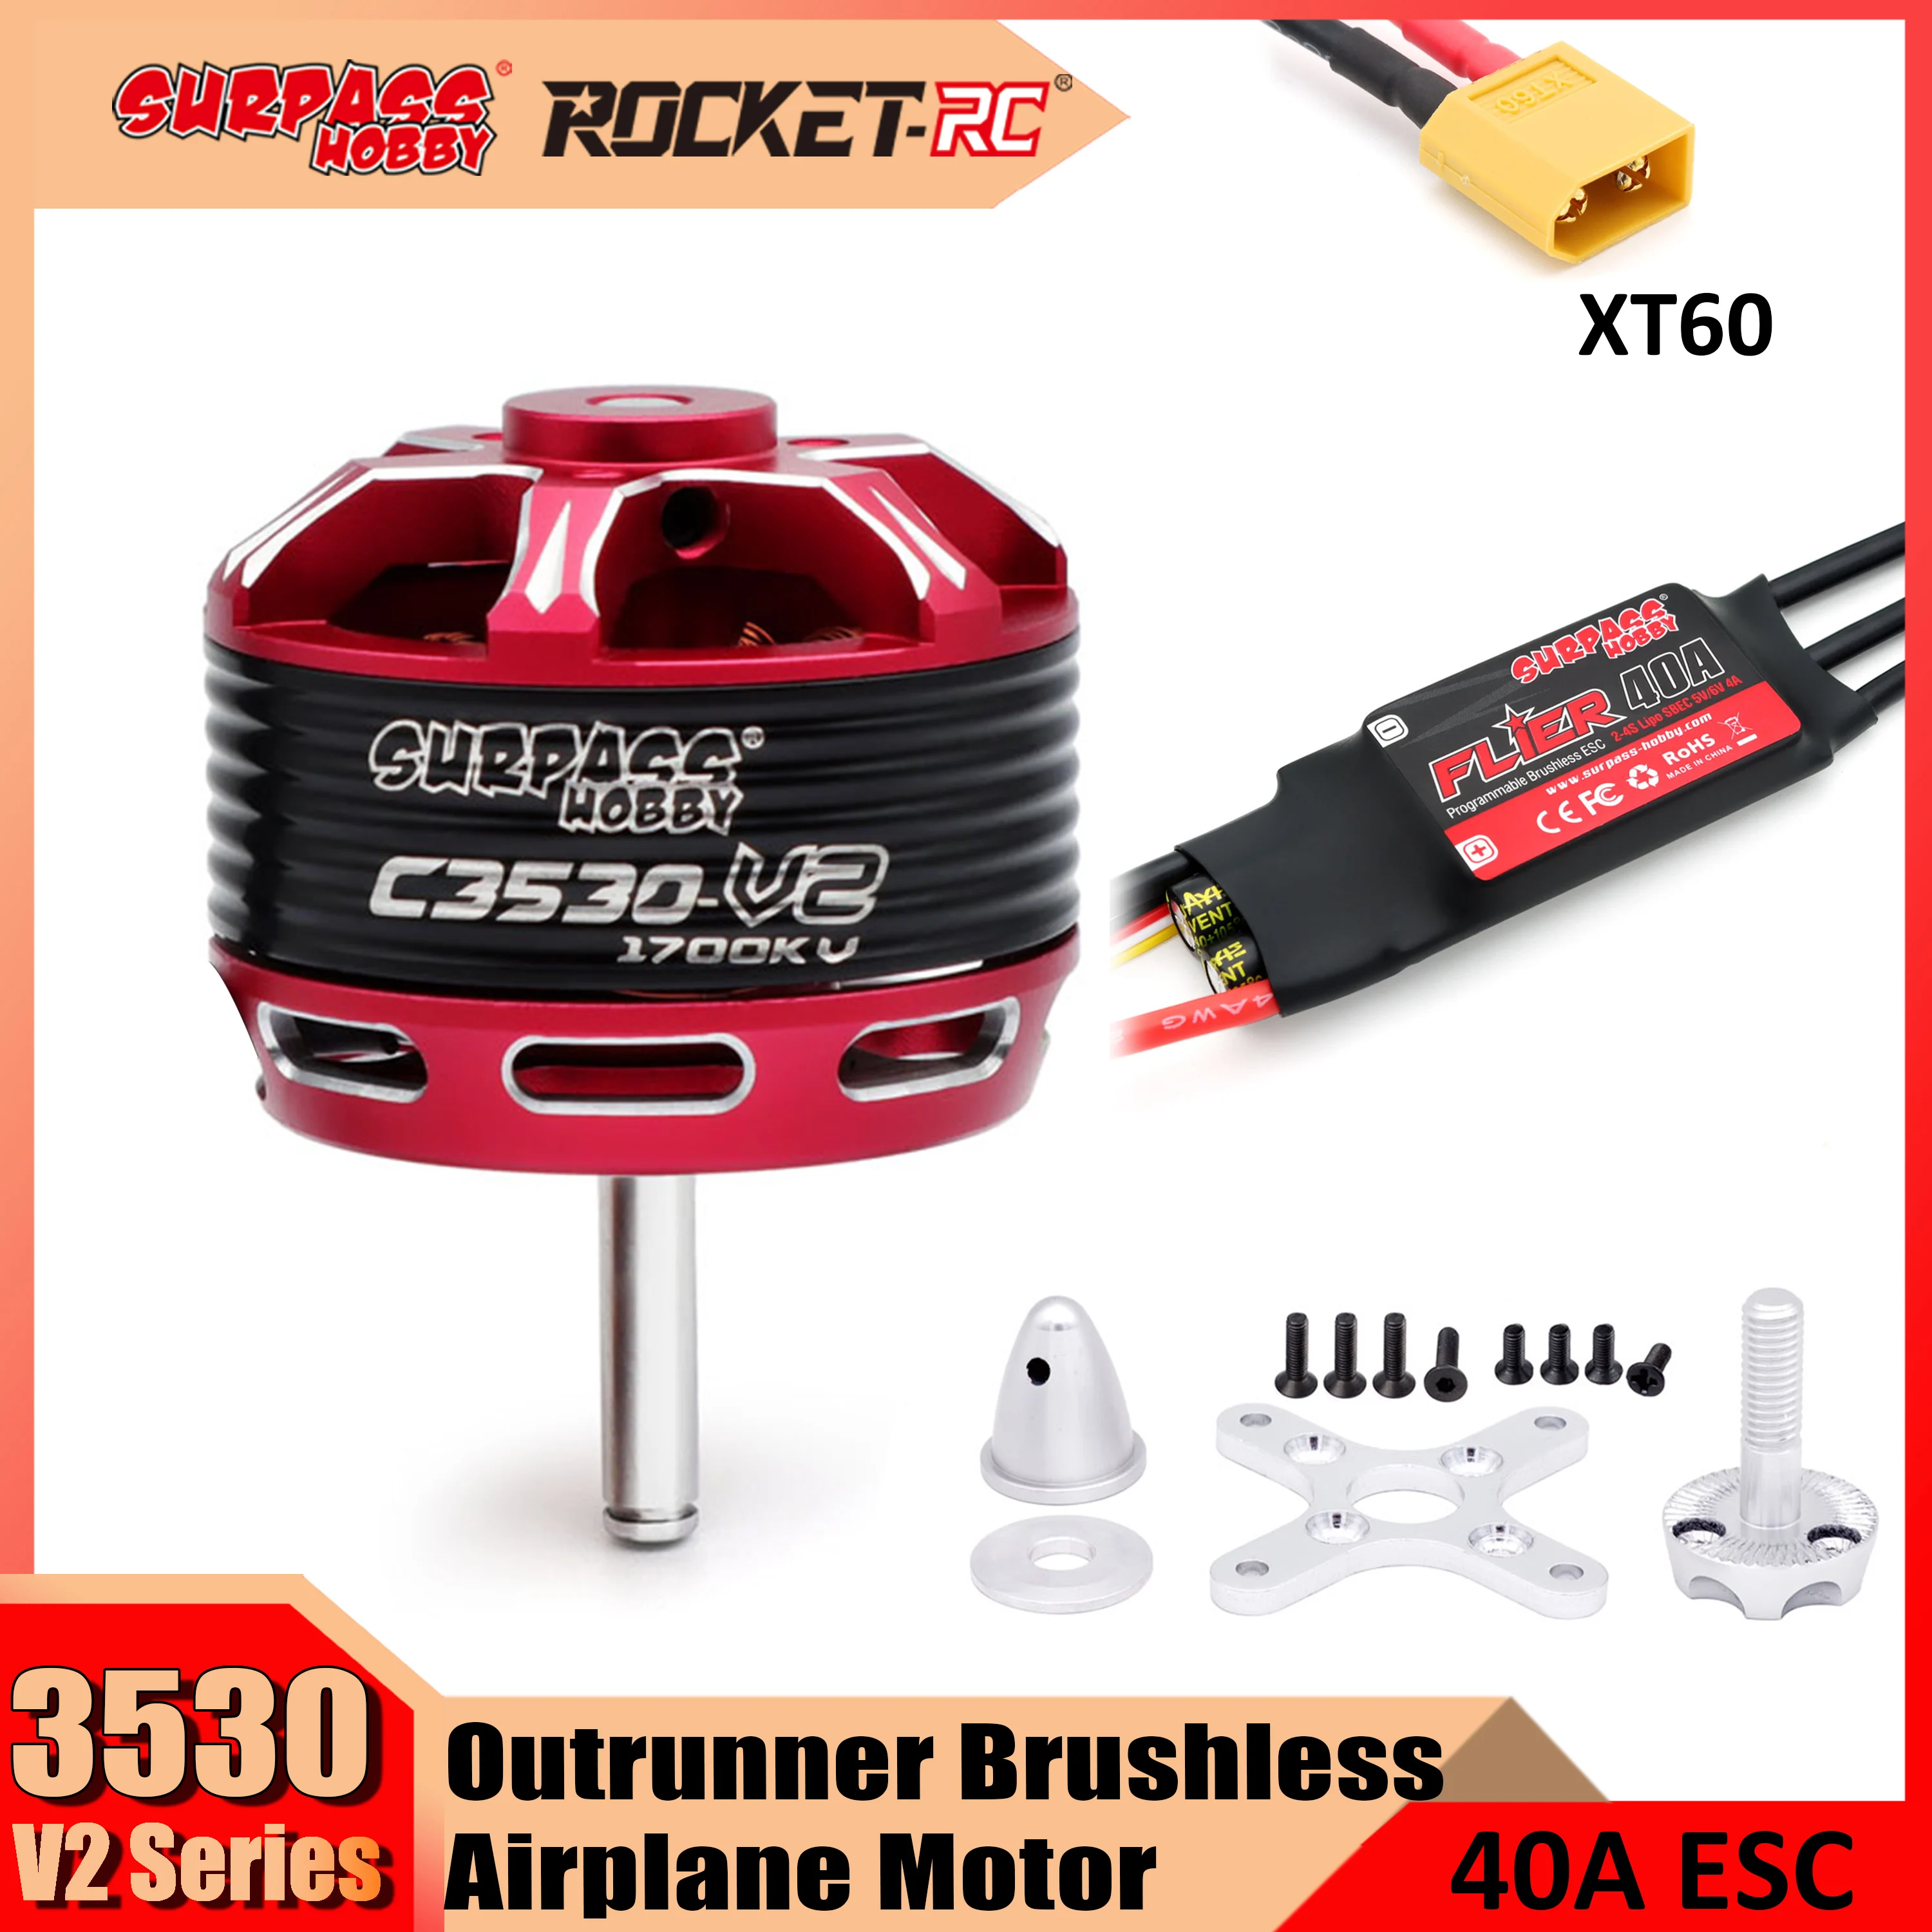 

Surpass Hobby C3530 3530 V2 Brushless Motor Outrunner with 40A ESC for RC Airplane Fixed-wing Glider Aircraft Multicopter Plane